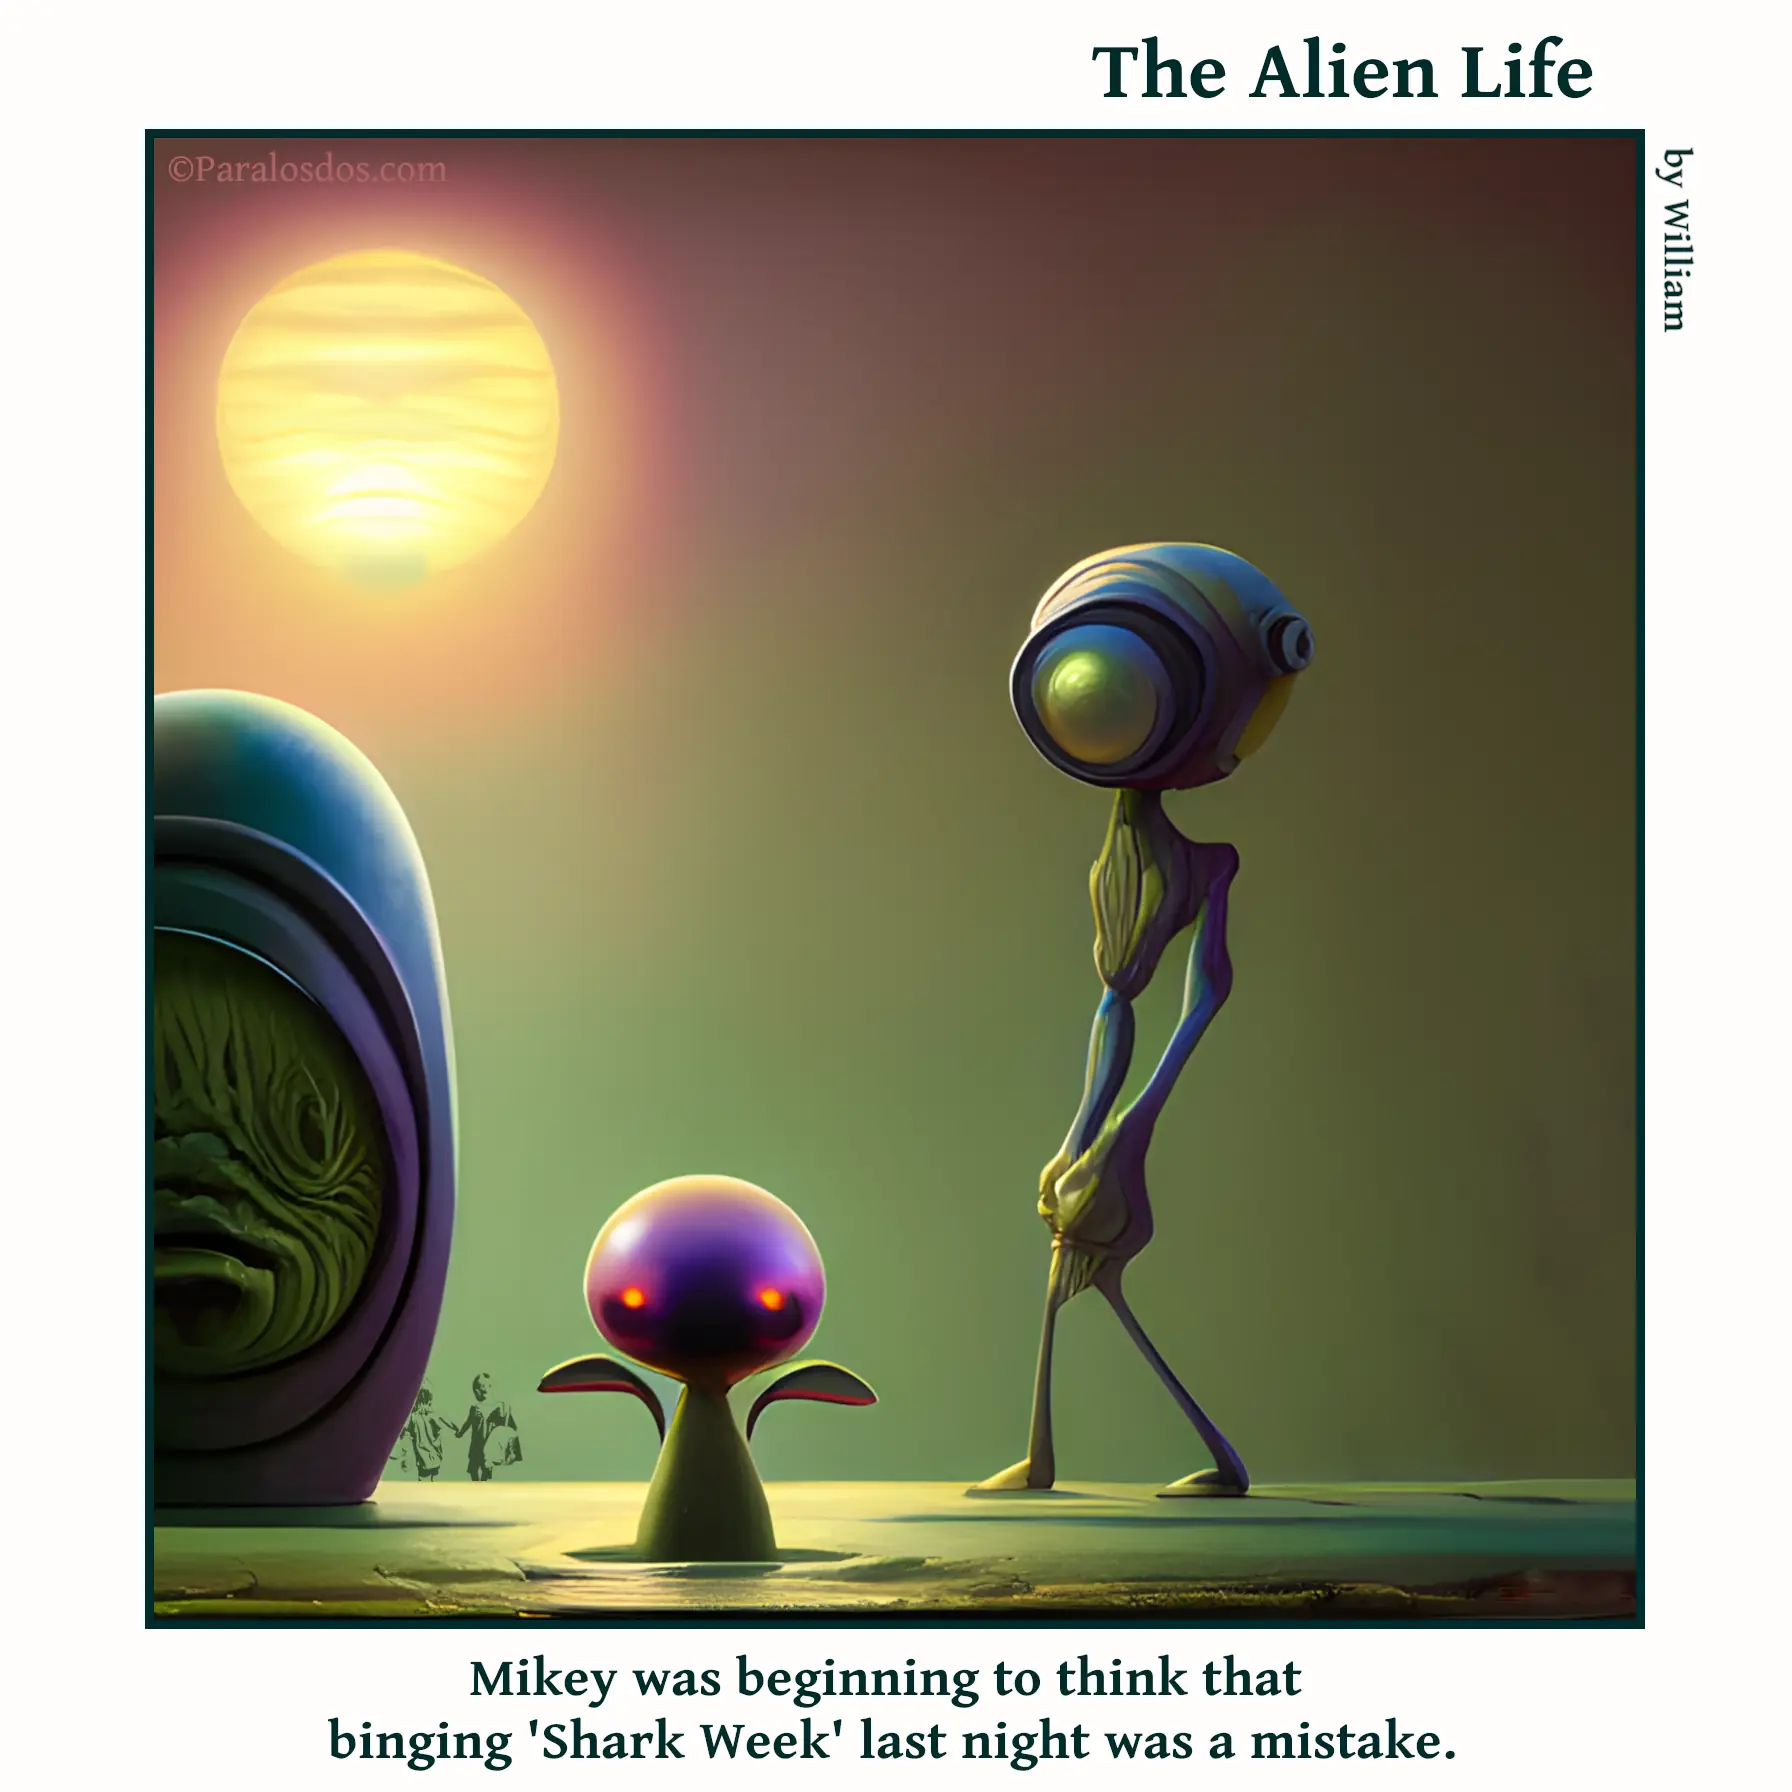 The Alien Life, one panel Comic. Three aliens are on the beach, one of them is just standing in the water. The caption reads: Mikey was beginning to think that binging 'Shark Week' last night was a mistake.